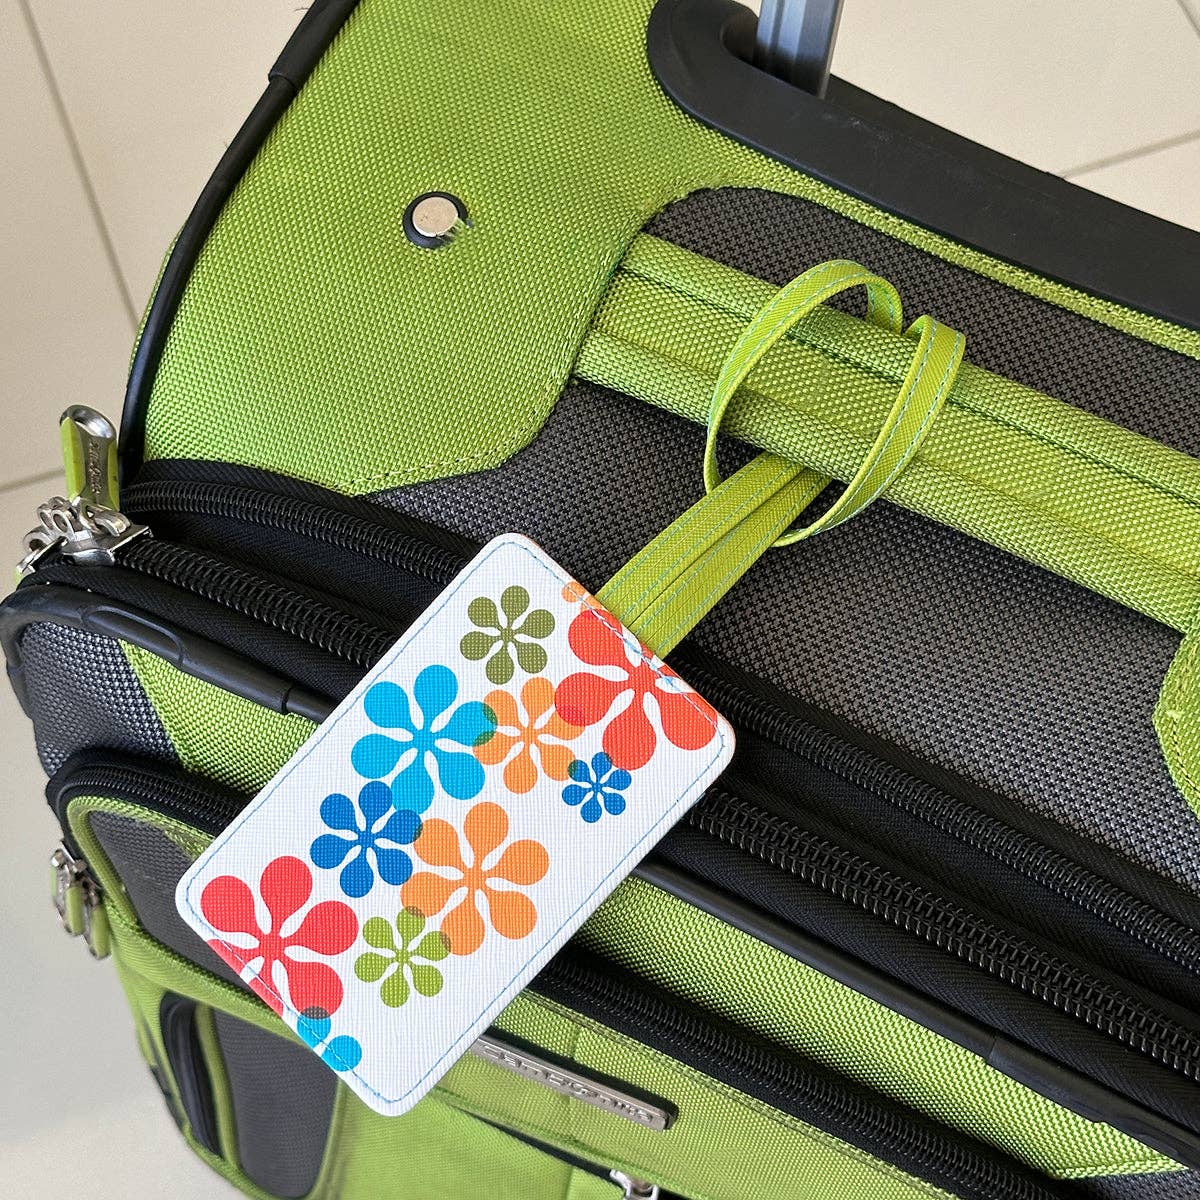 Modfest Luggage Tag - Multi Color